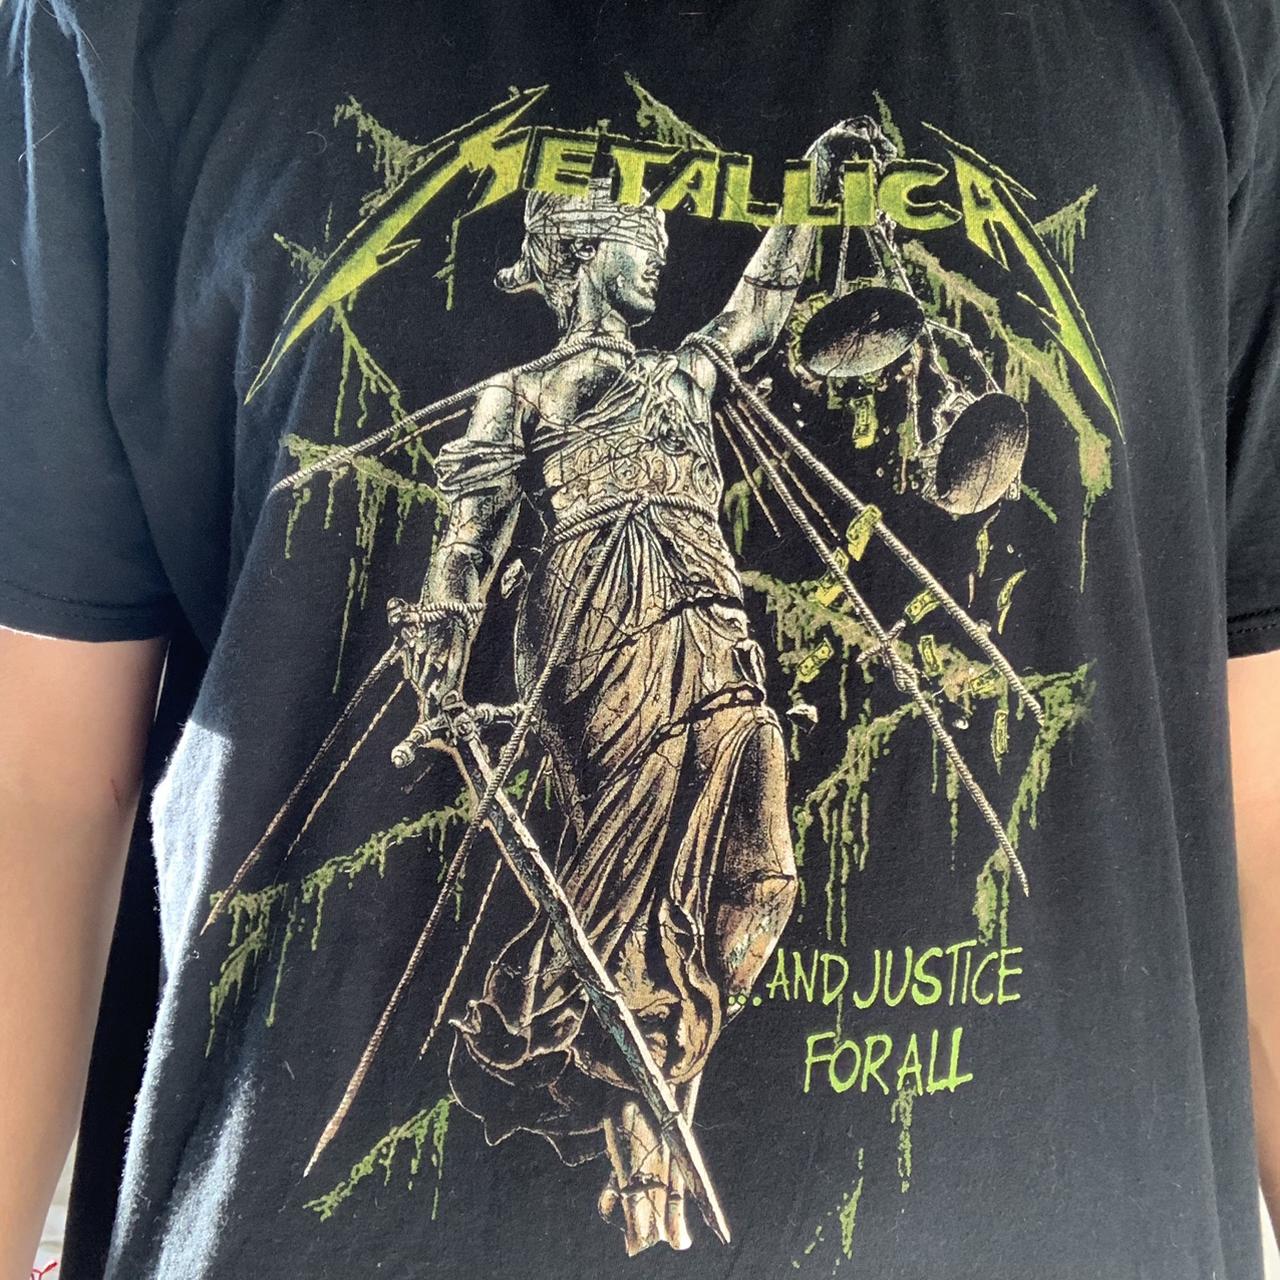 Metallica “Justice For All” Tee, Labeled xl but fits...